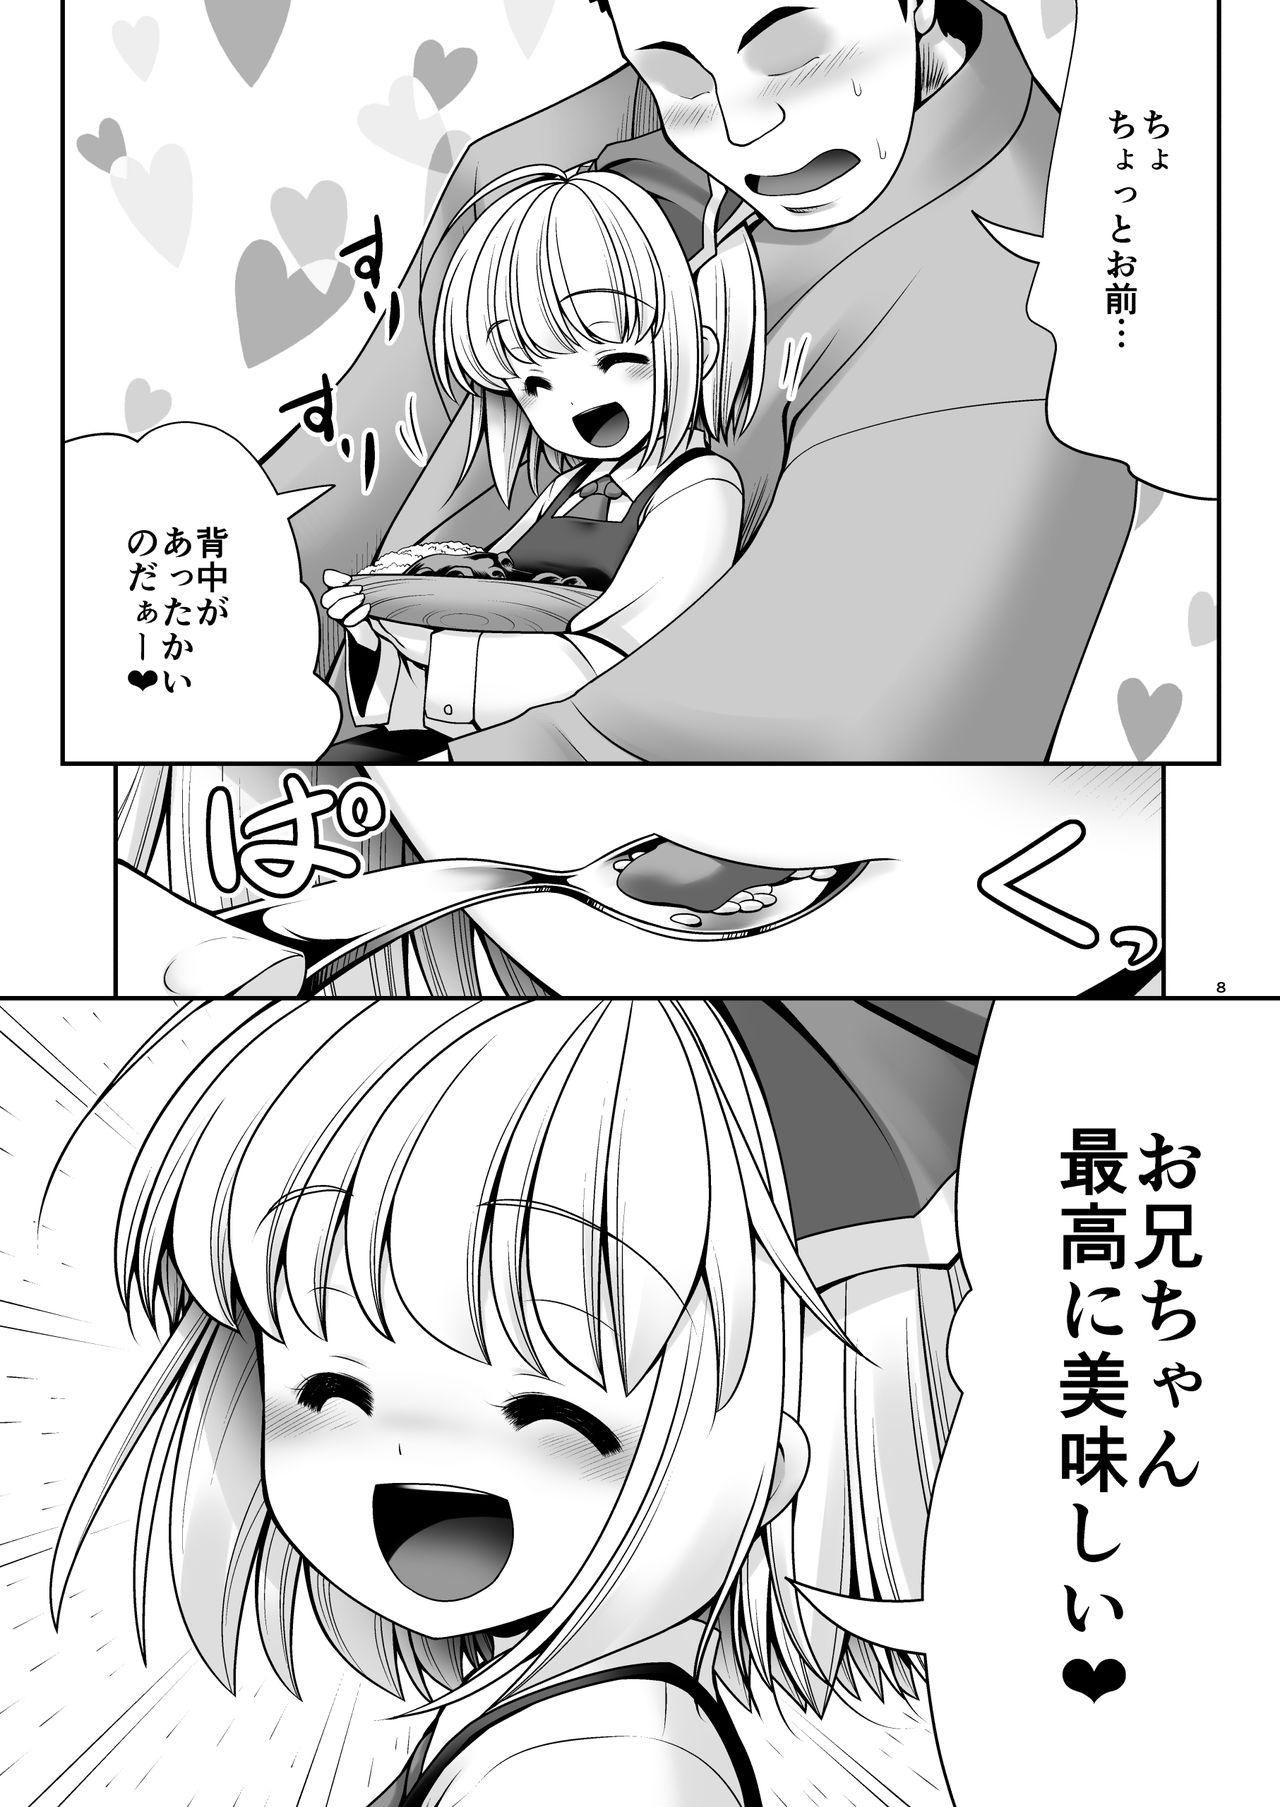 Gays "Okaeshi" - Touhou project First - Page 8